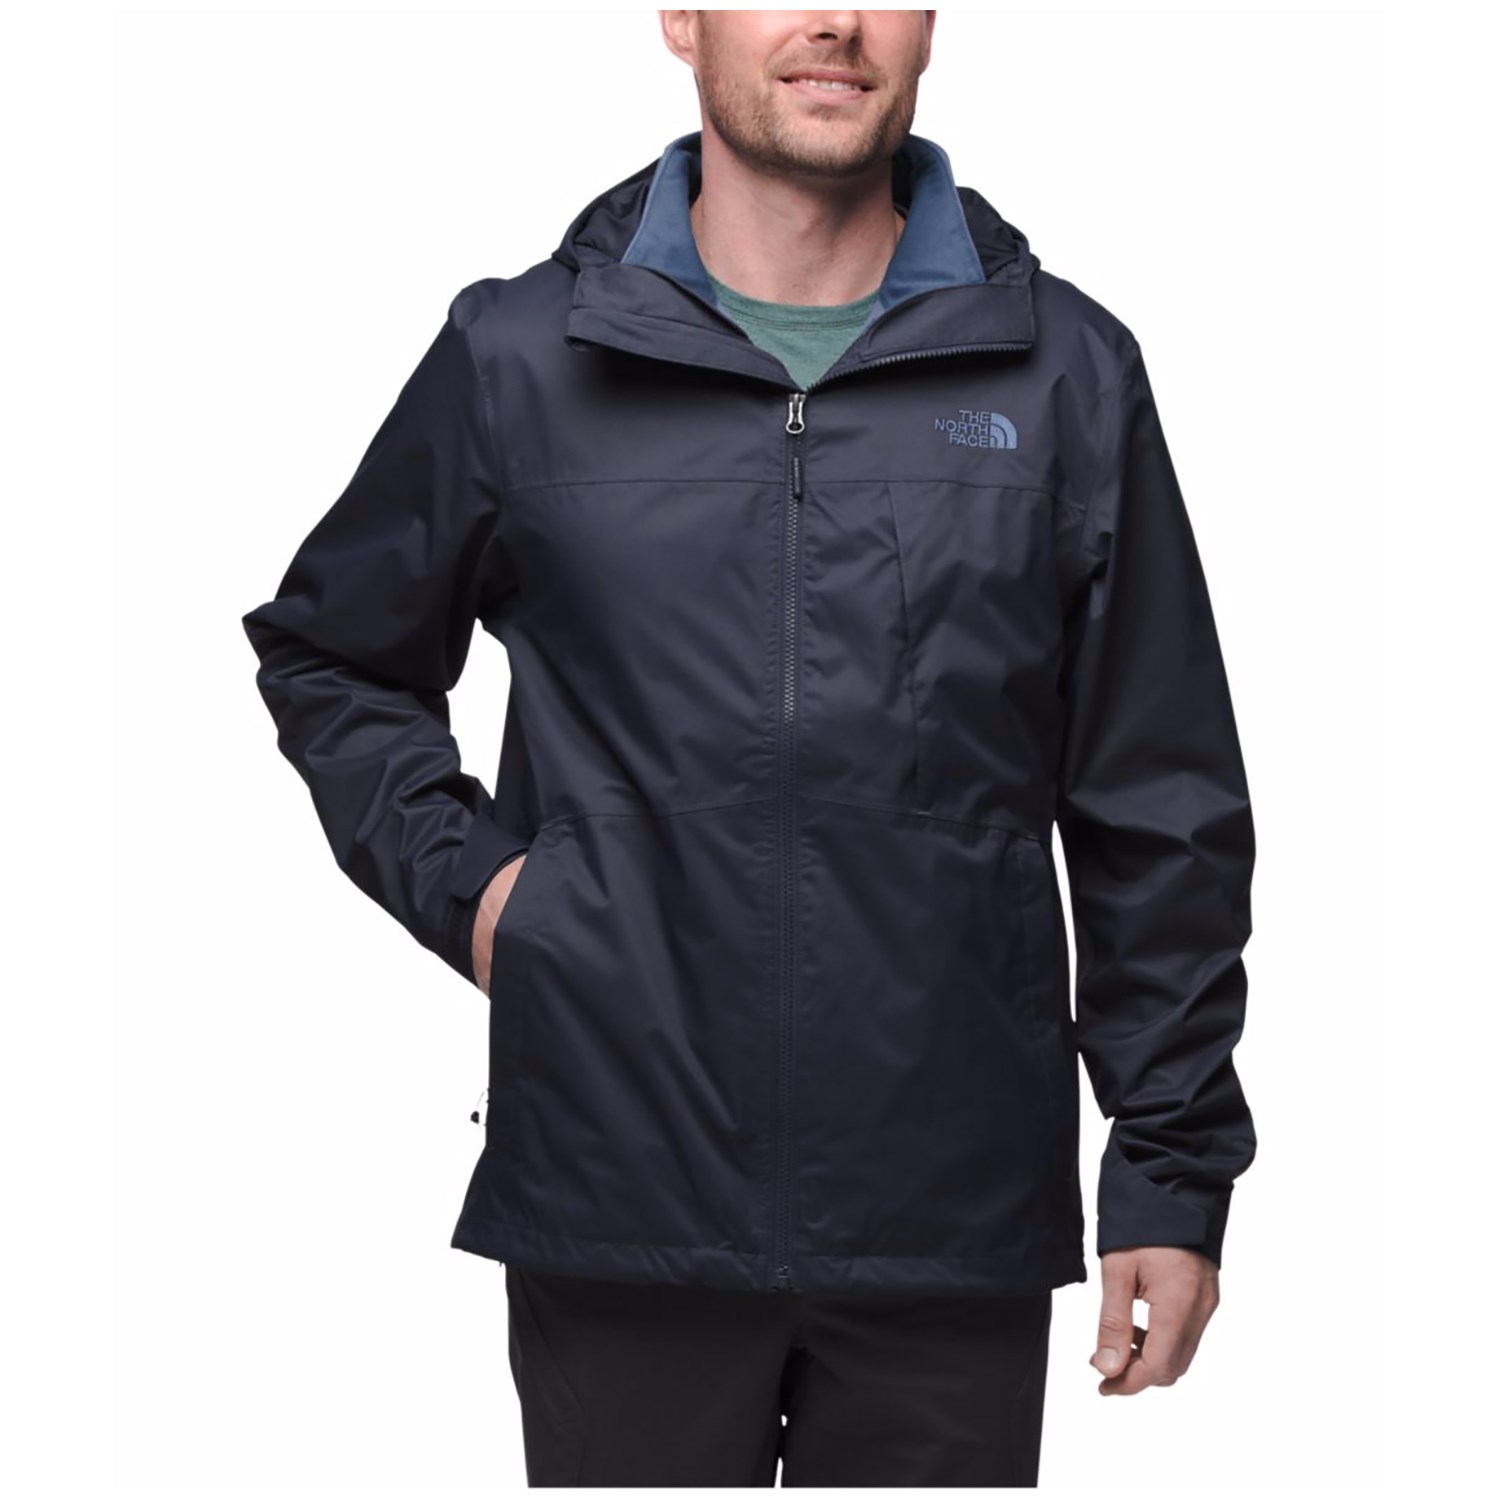 arrowood triclimate jacket review